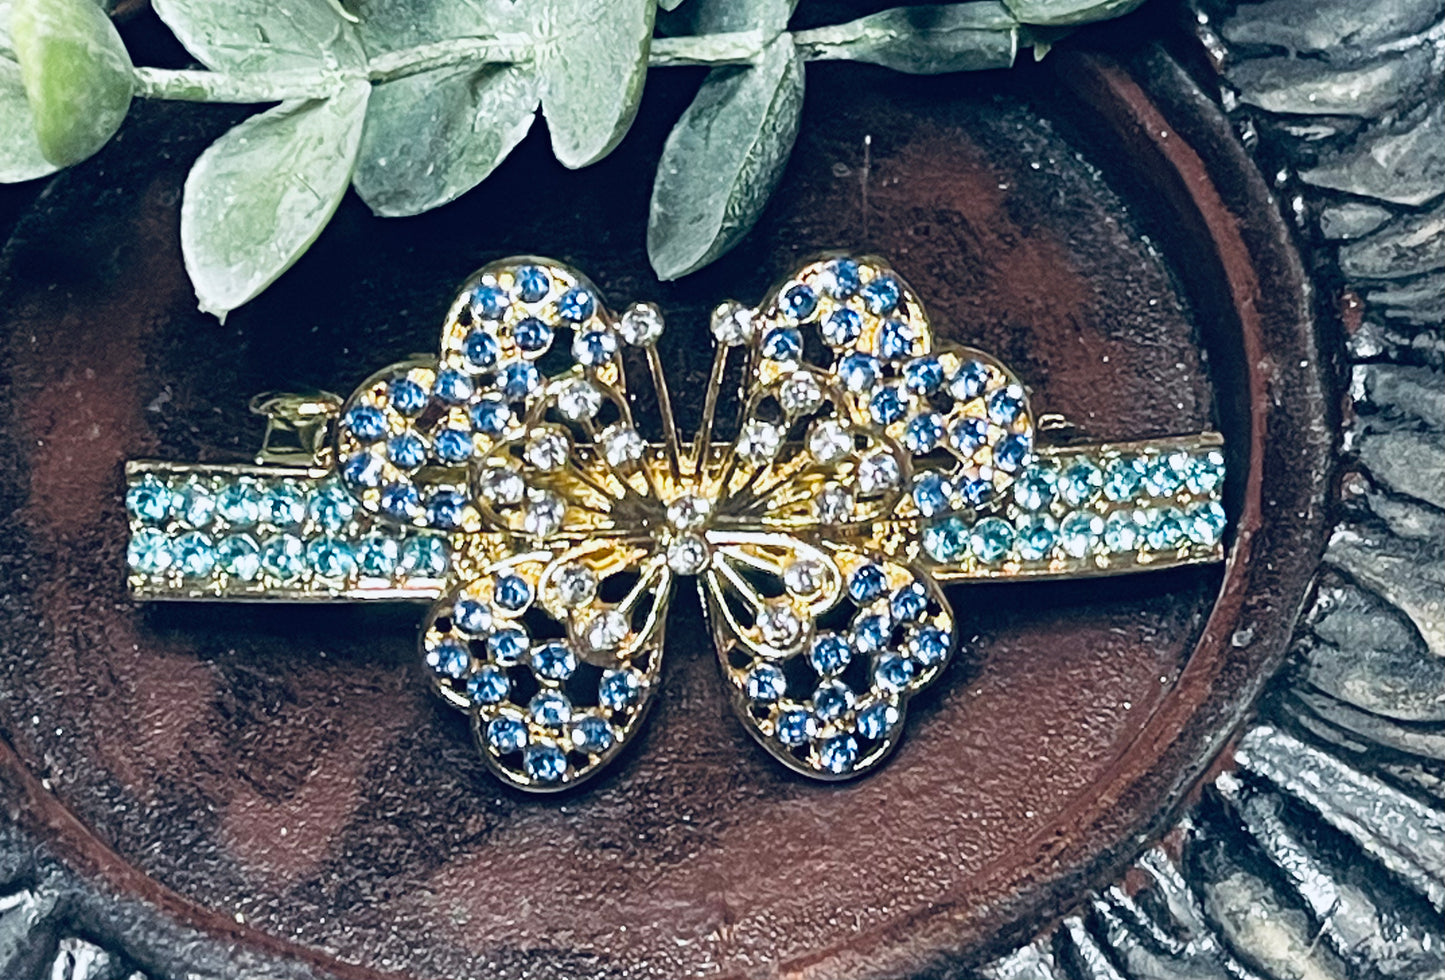 Teal blue Clear Crystal butterfly rhinestone barrette approximately 3.0” gold tone formal hair accessories gift wedding bridesmaid prom birthday mother of bride groom